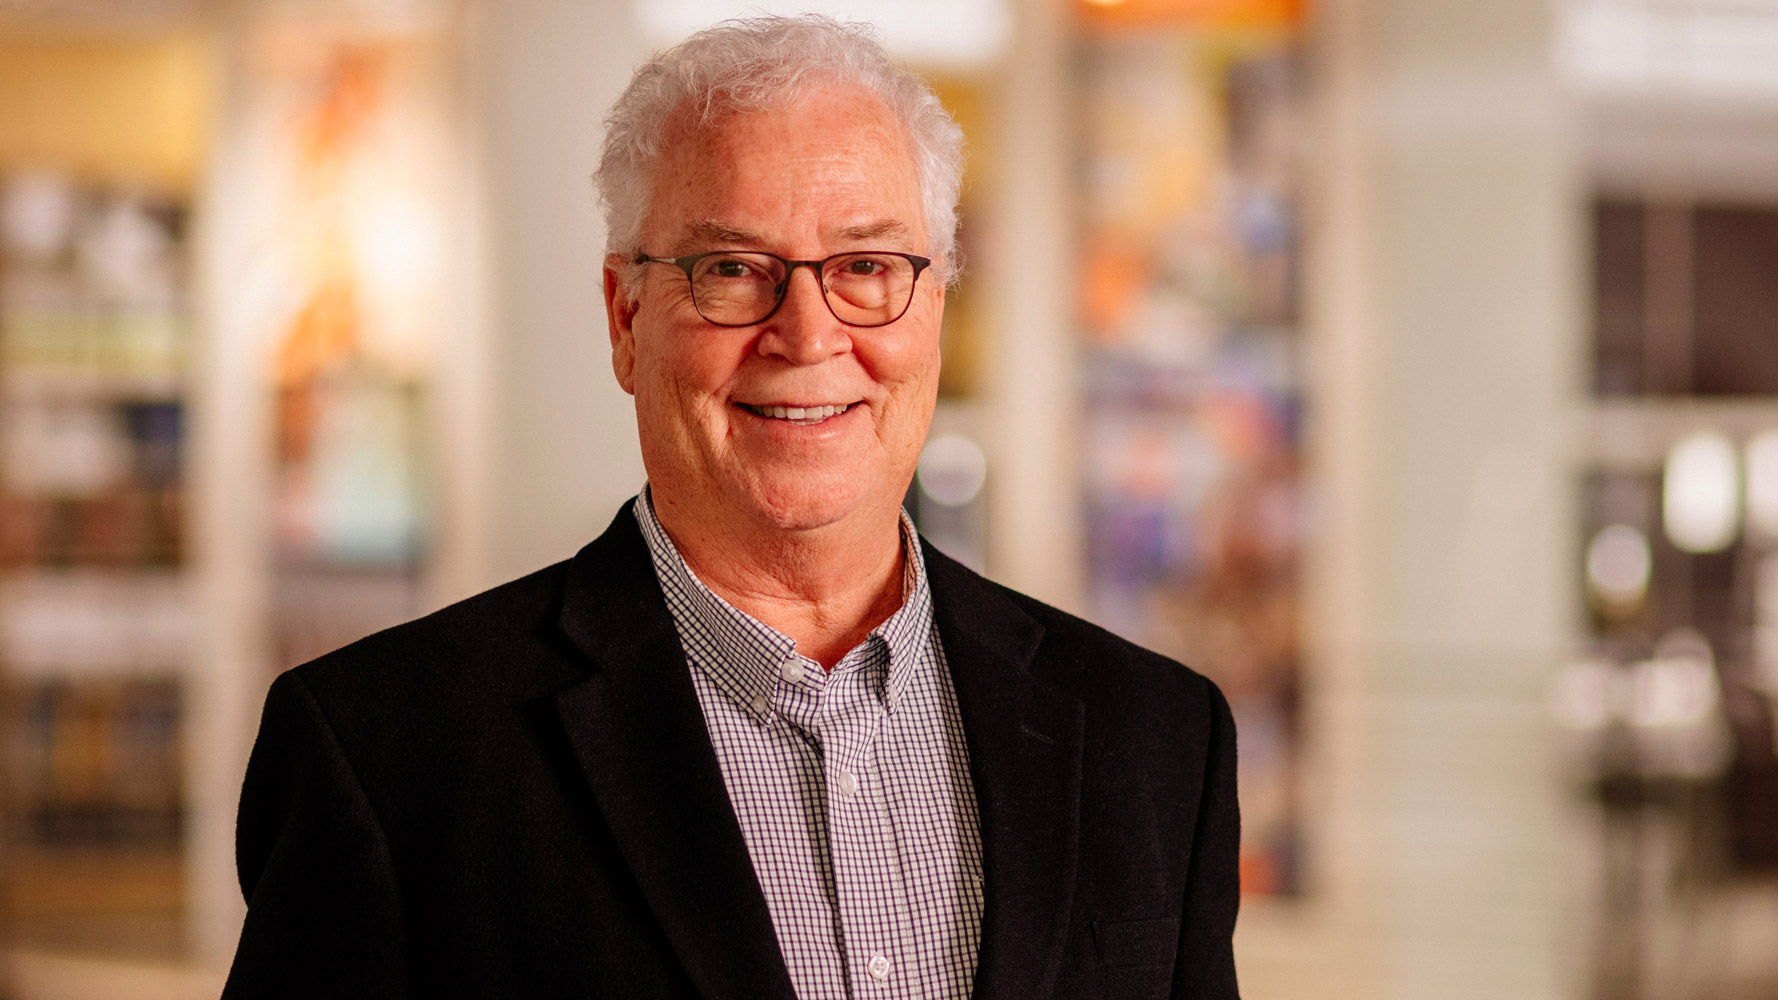 Interview with Bob Weis, Global Leader of Immersive Experience Design at Gensler